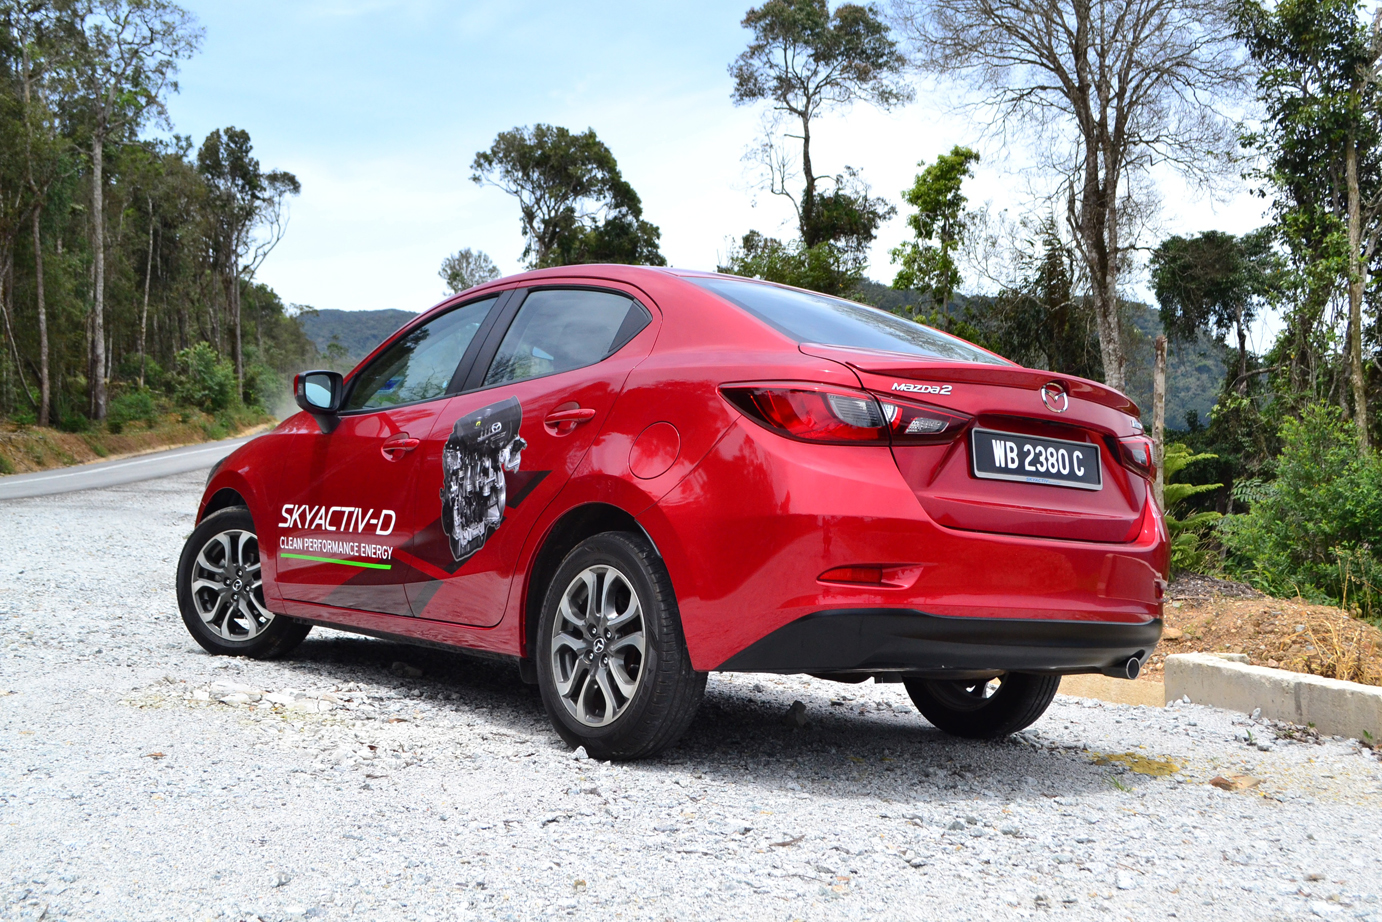 The Mazda 2 SkyActivD Sedan  great things come in small packages